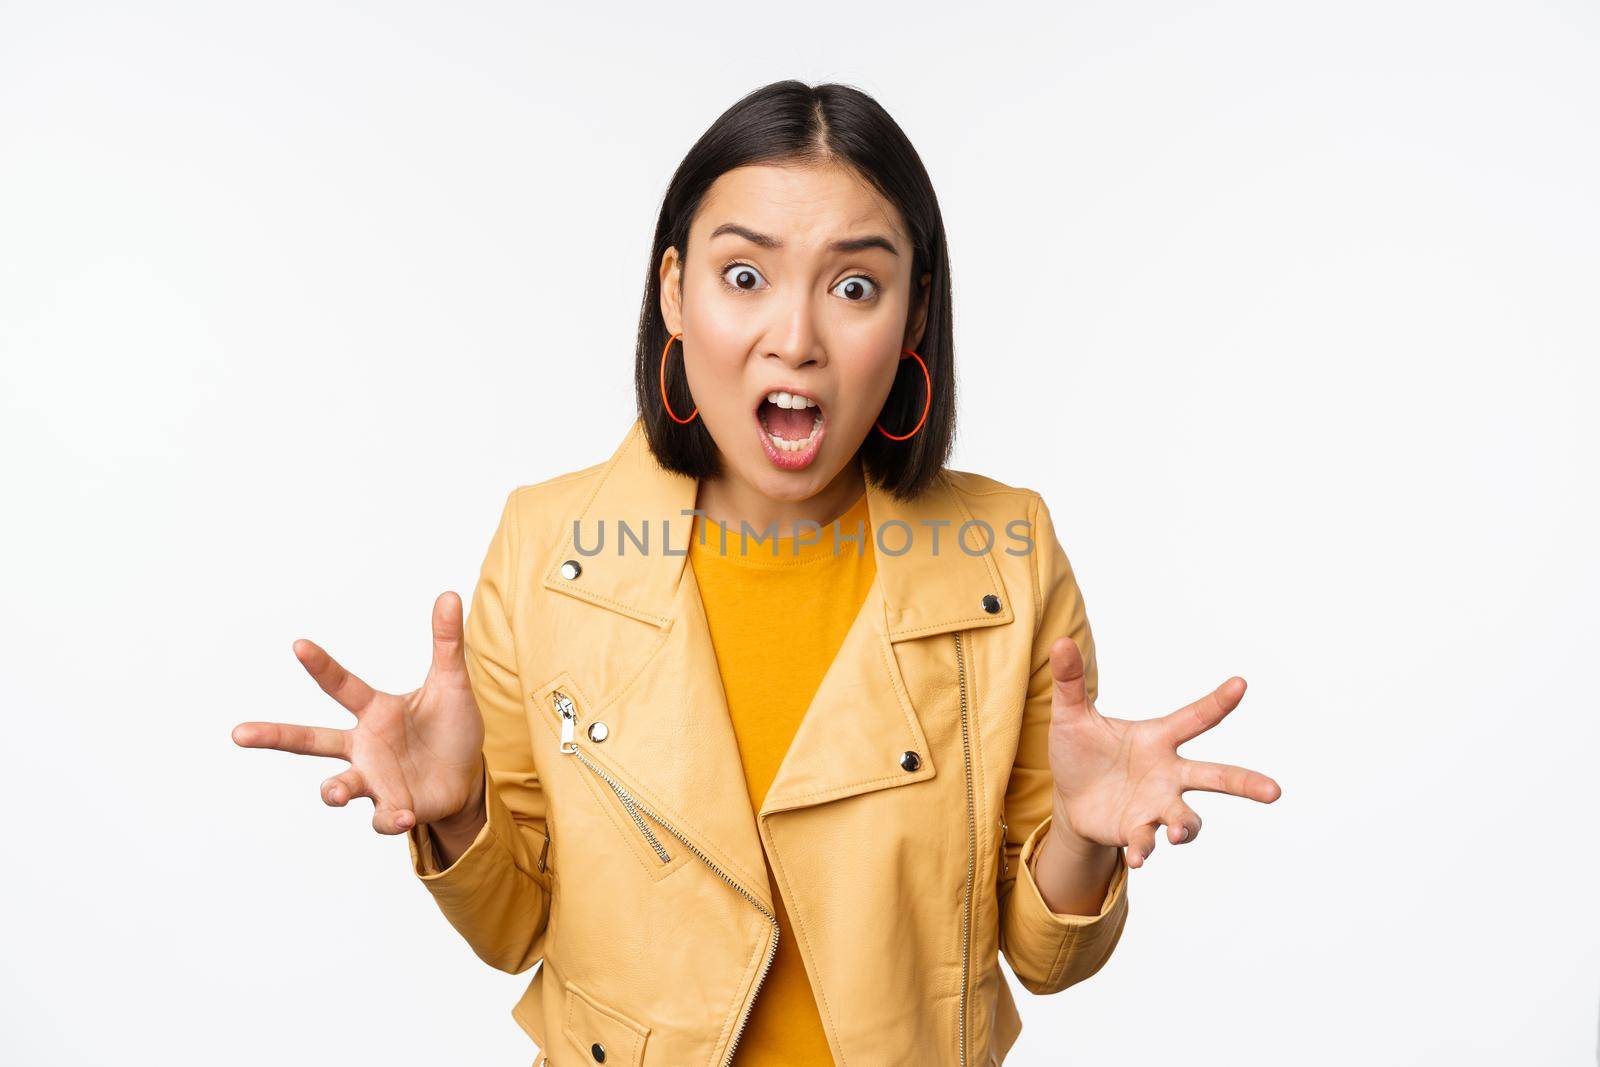 Asian angry woman arguing, shaking hands angry and screaming, shouting with frustrated face, standing over white background.